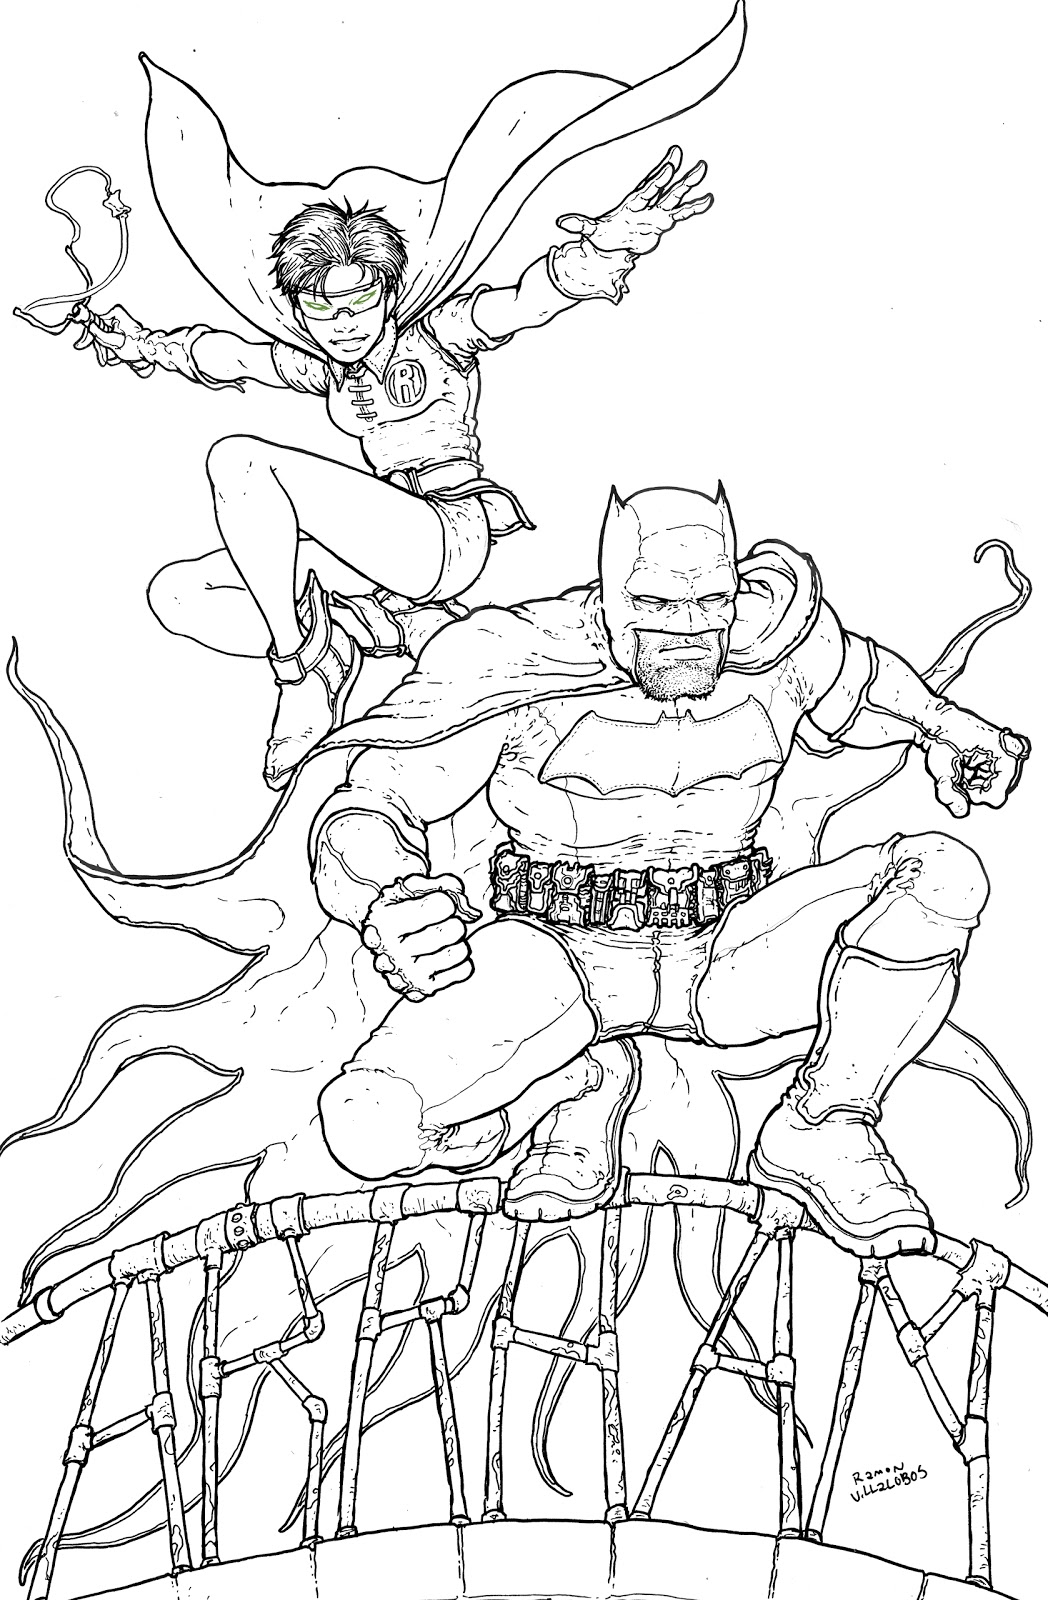 Dark Knight Returns Sketch Coloring Page